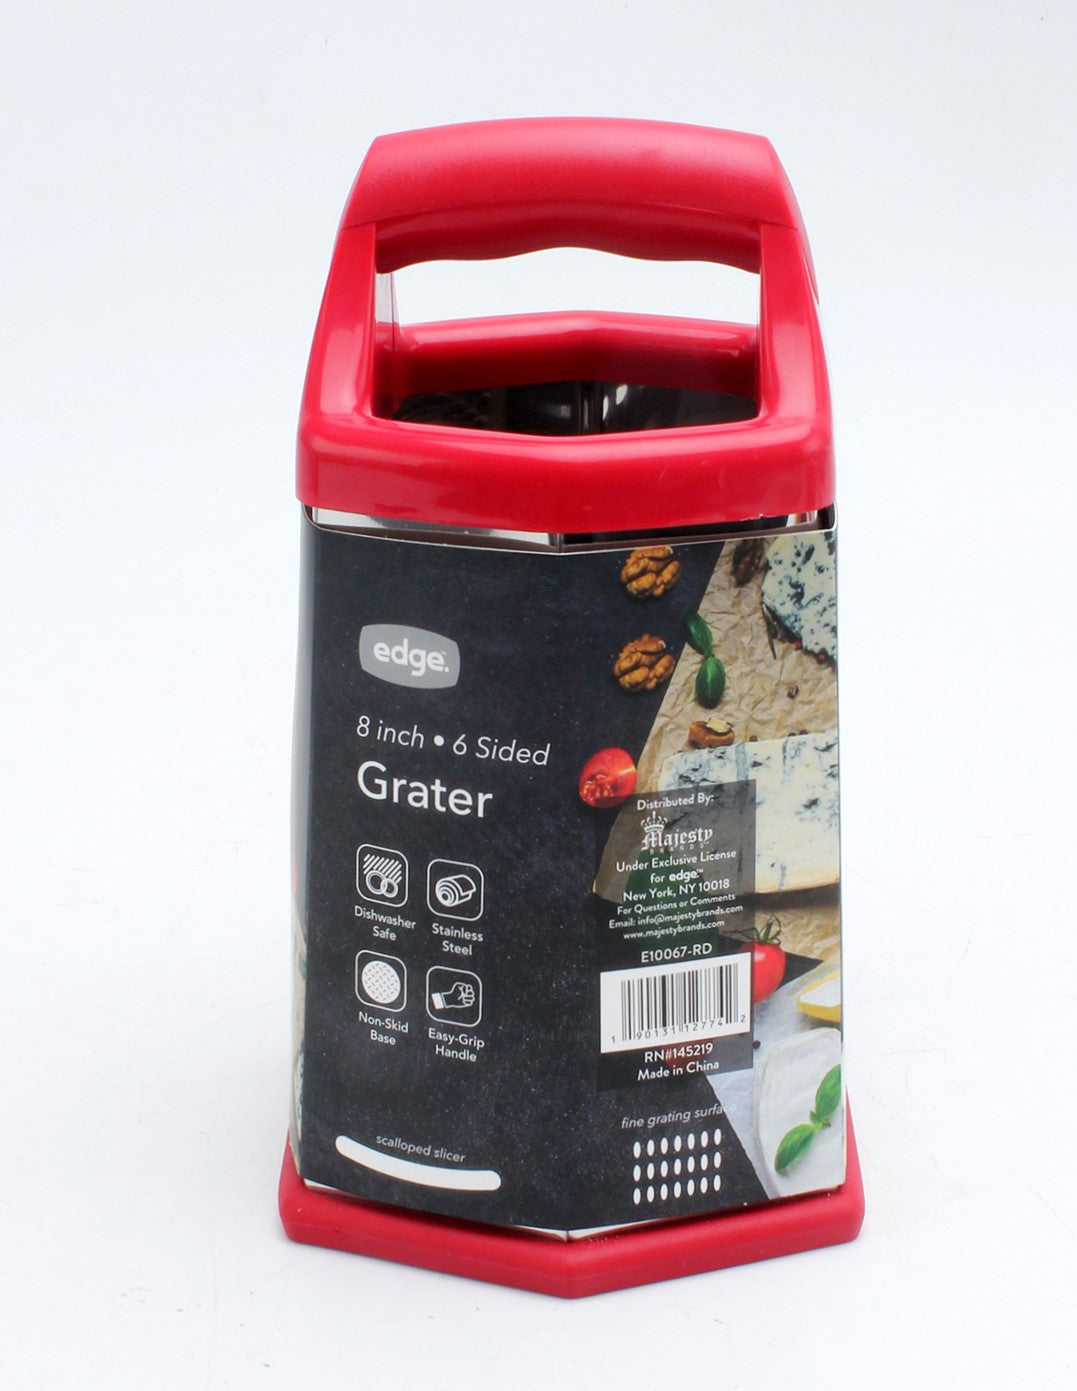 Edge Stainless Steel 6 Sided Grater with Silicone Non Skid Base and TPR Handles, Red